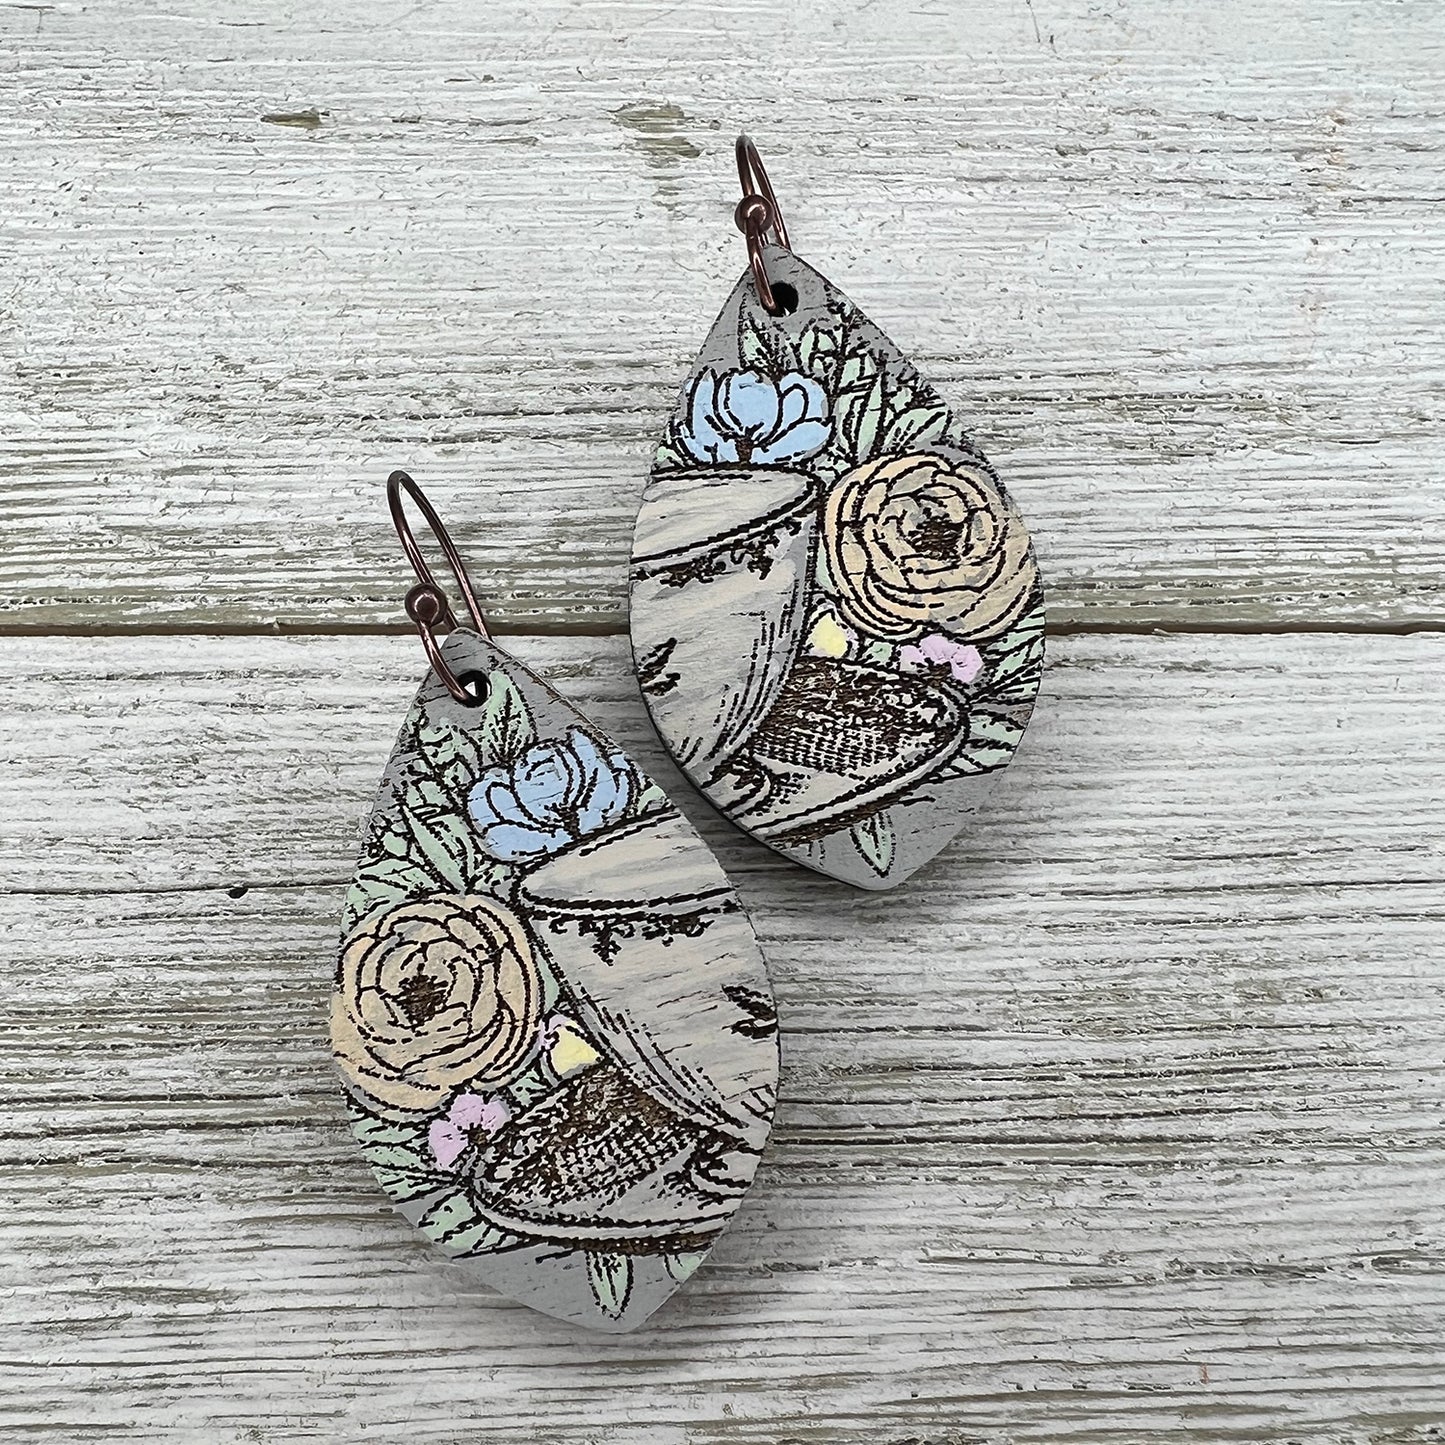 Vintage Tea Party Teardrop Earrings - "Tea Cup and Saucer with Flowers"